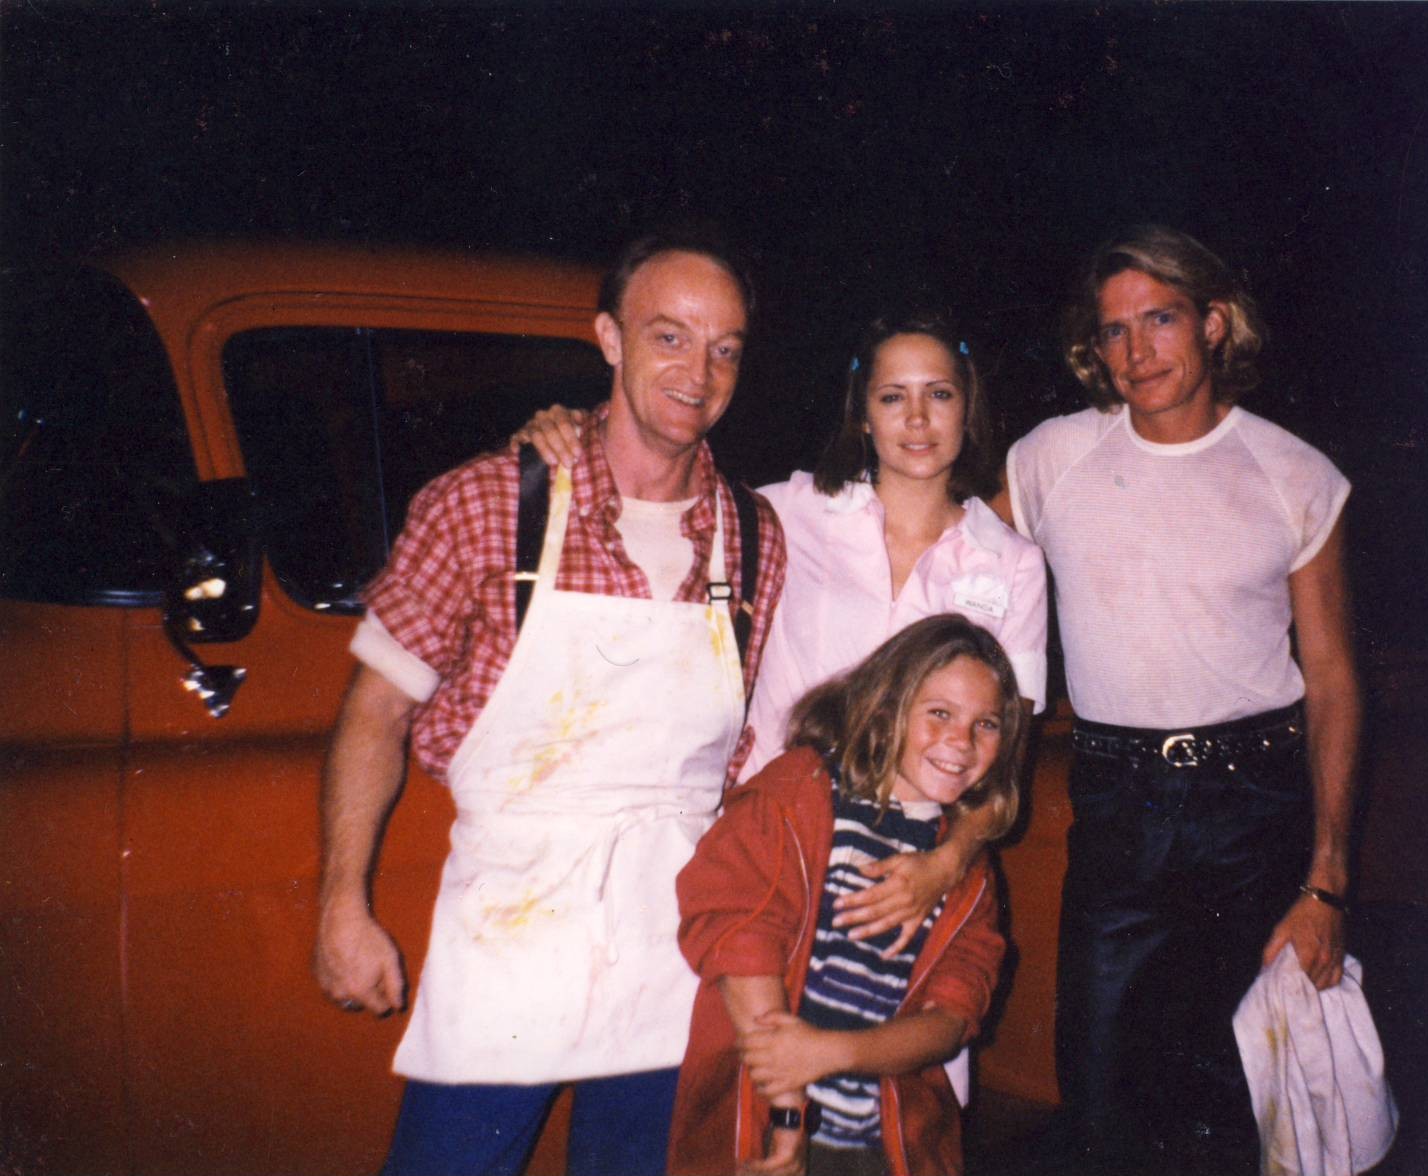 Tim De Zarn, Sherrie Rose, Thomas Haden Church, and Ryan O'Donohue on the set of Tales from the Crypt: Demon Knight